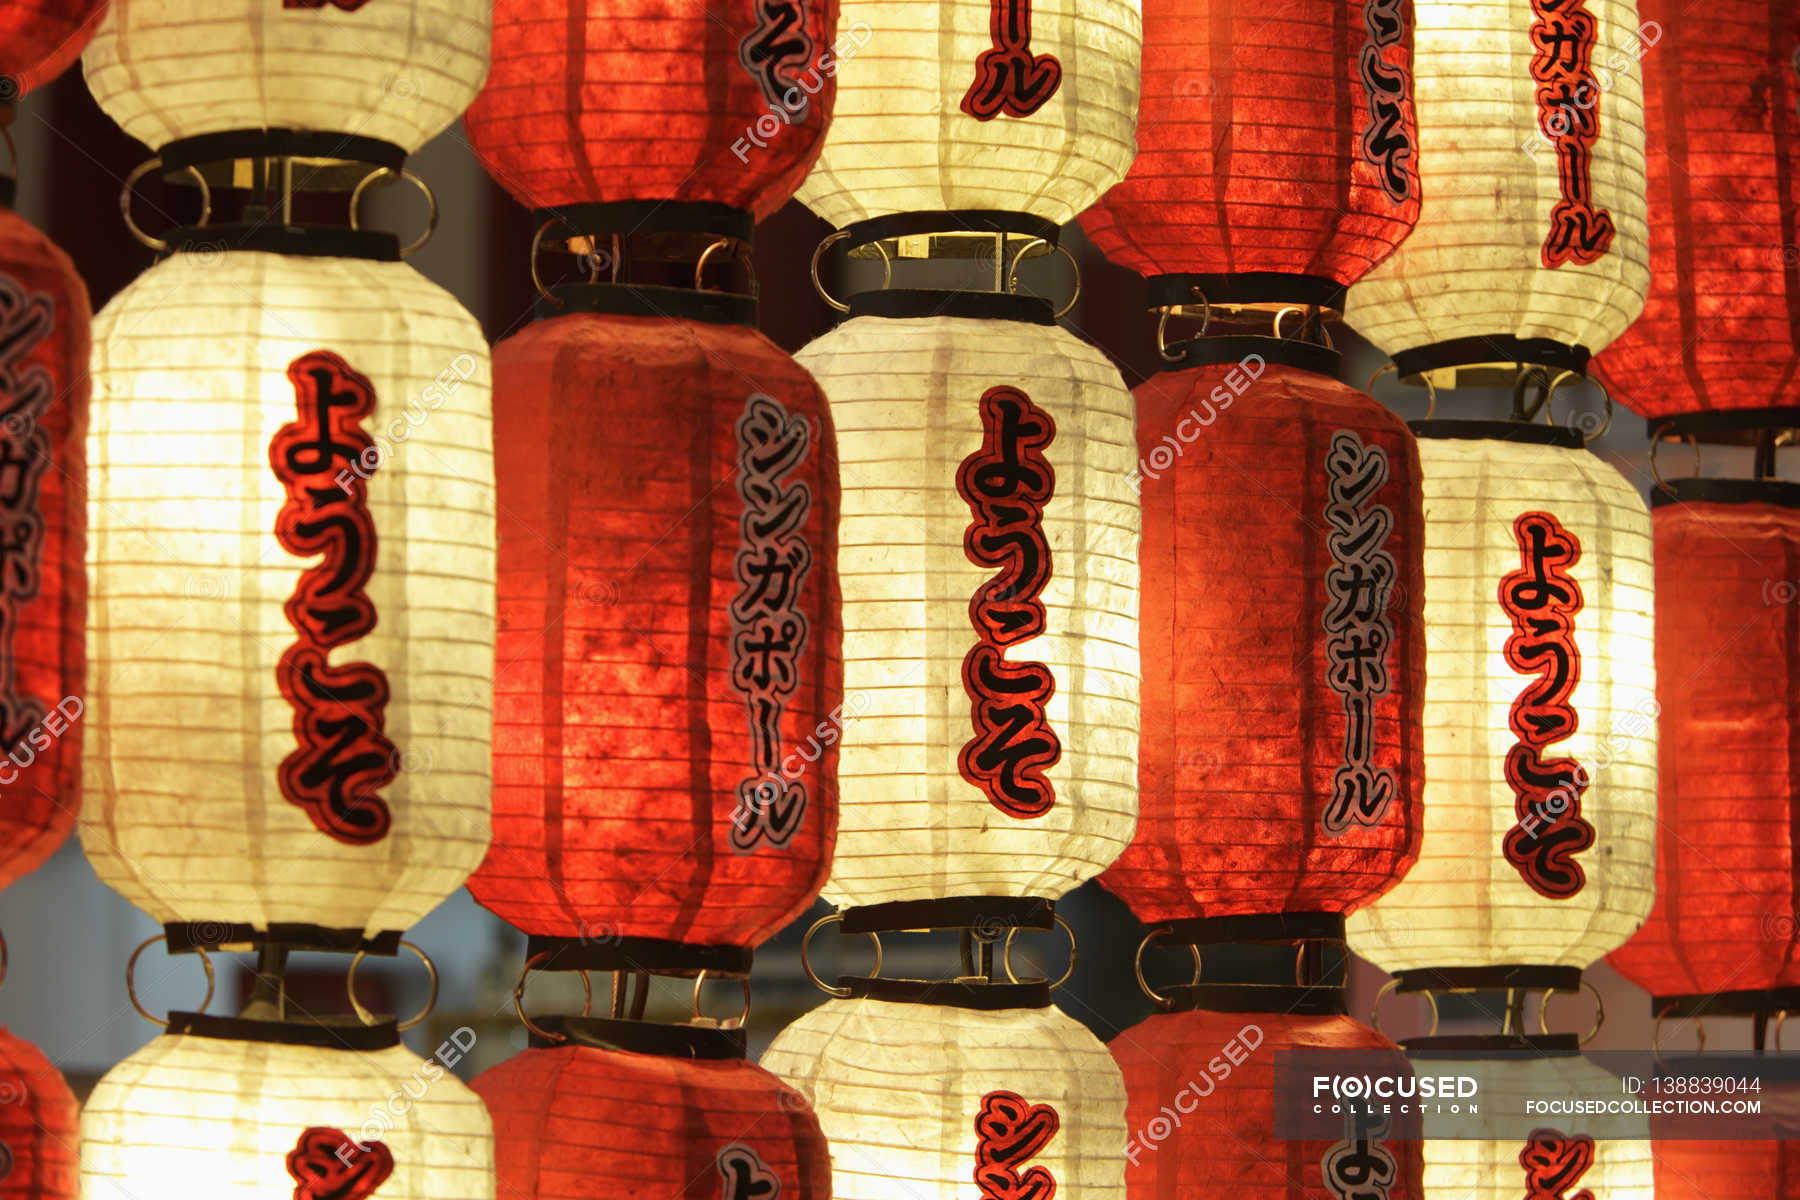 red-and-white-paper-lanterns-outdoors-close-up-stock-photo